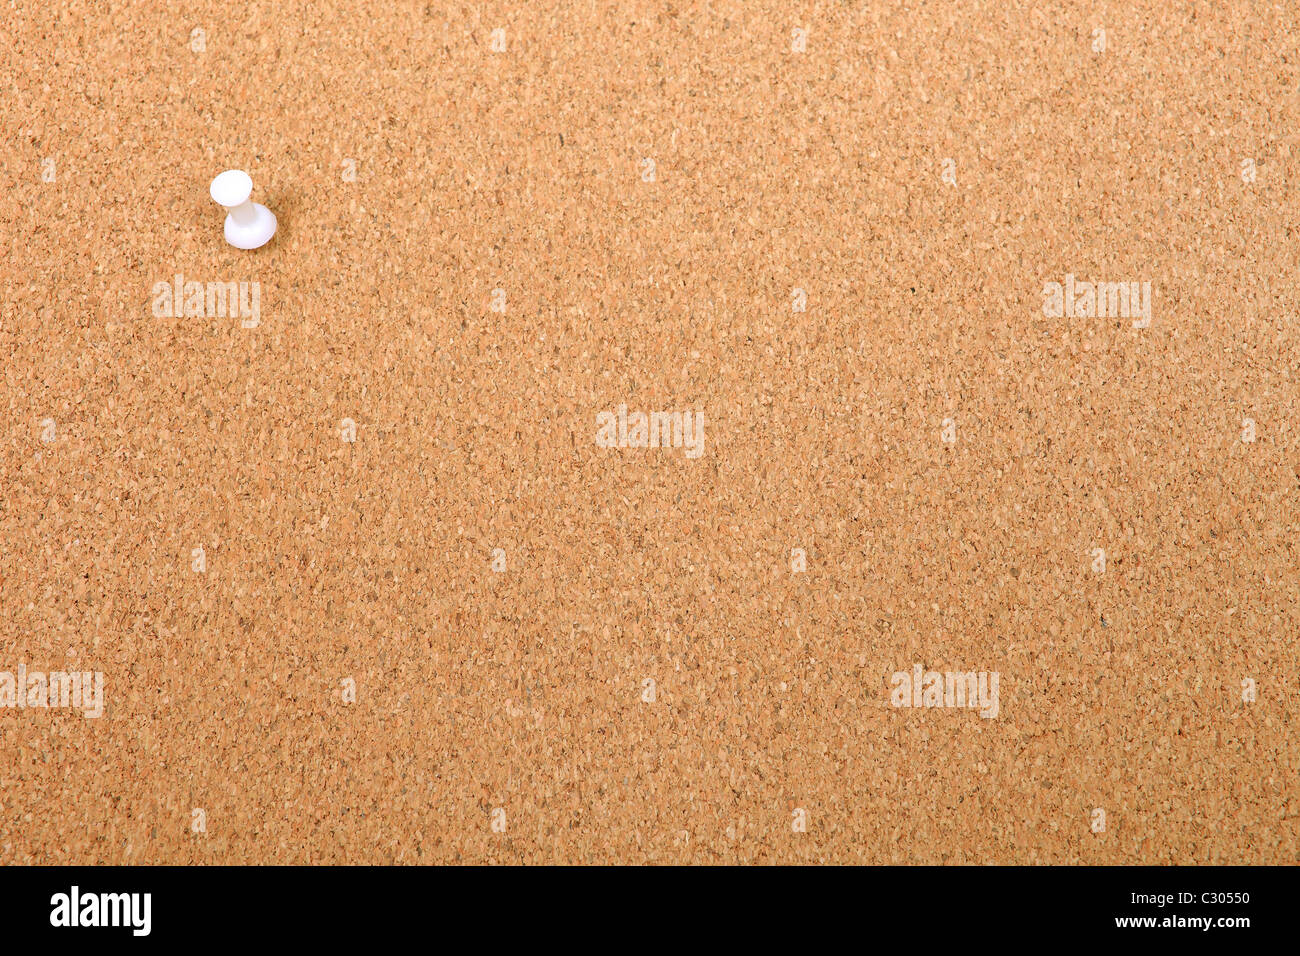 White thumbtack attached to cork message board. Good as background or backdrop. Stock Photo